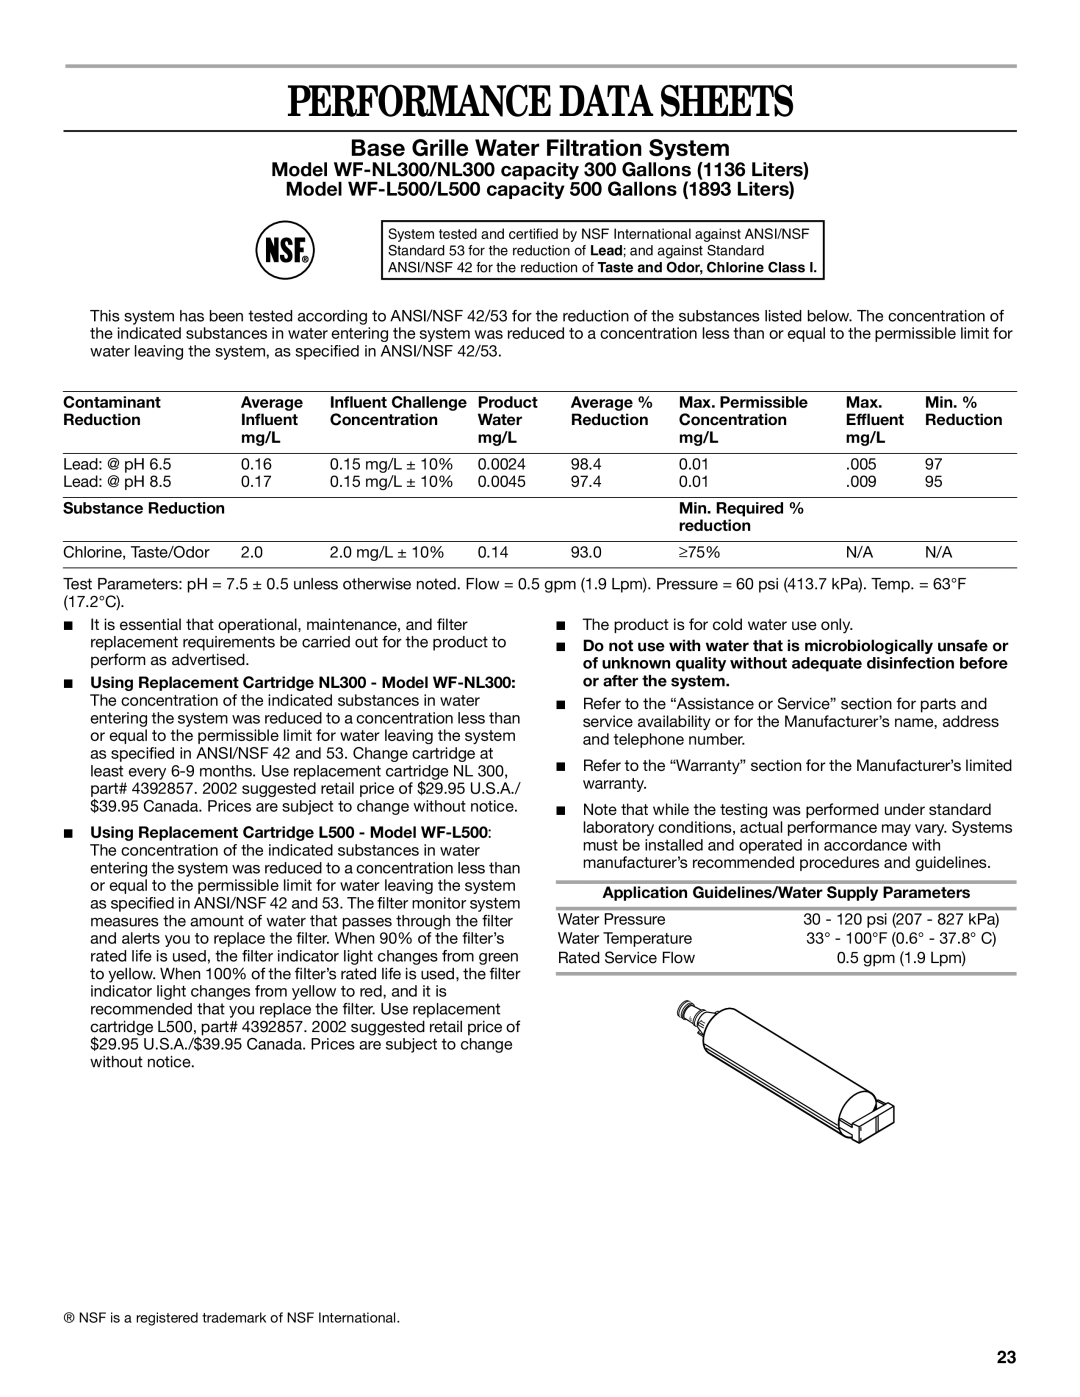 Whirlpool ED5NTGXLQ00 Performance Data Sheets, Base Grille Water Filtration System, Contaminant, Average, Product, Min. % 